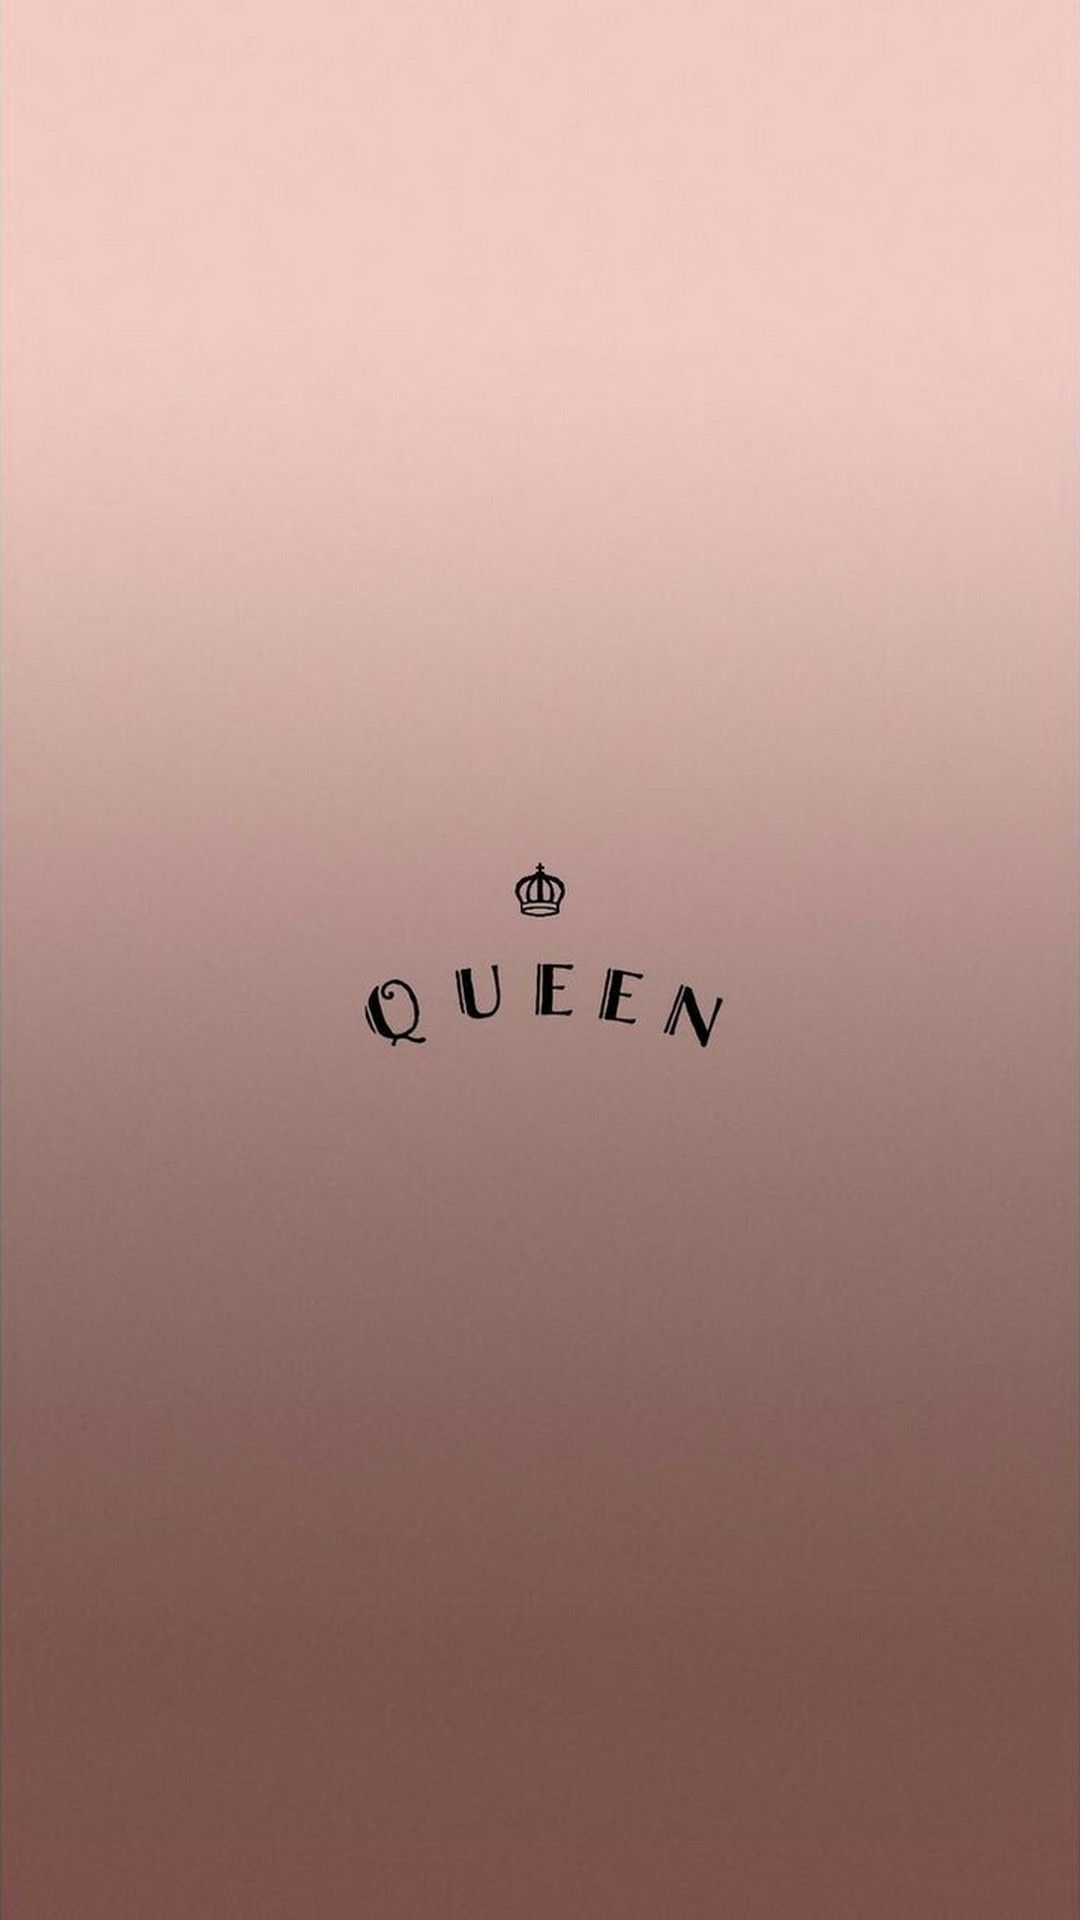 Queen logo on a pink background - Rose gold